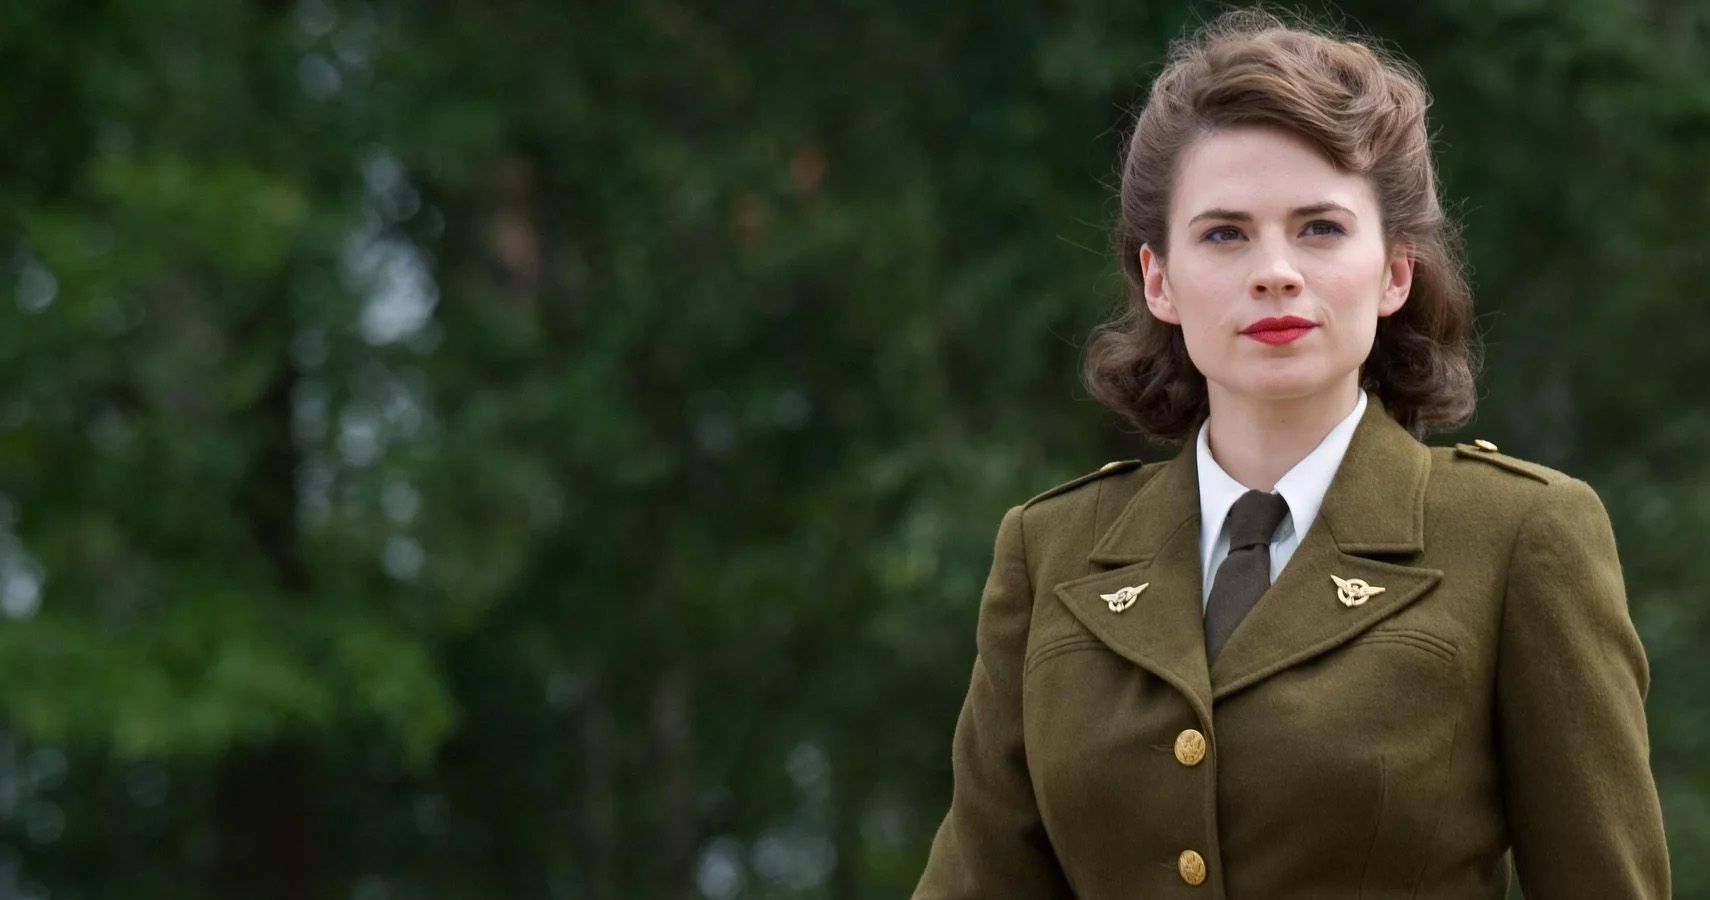 10 Peggy Carter Facts The MCU Never Revealed | ScreenRant